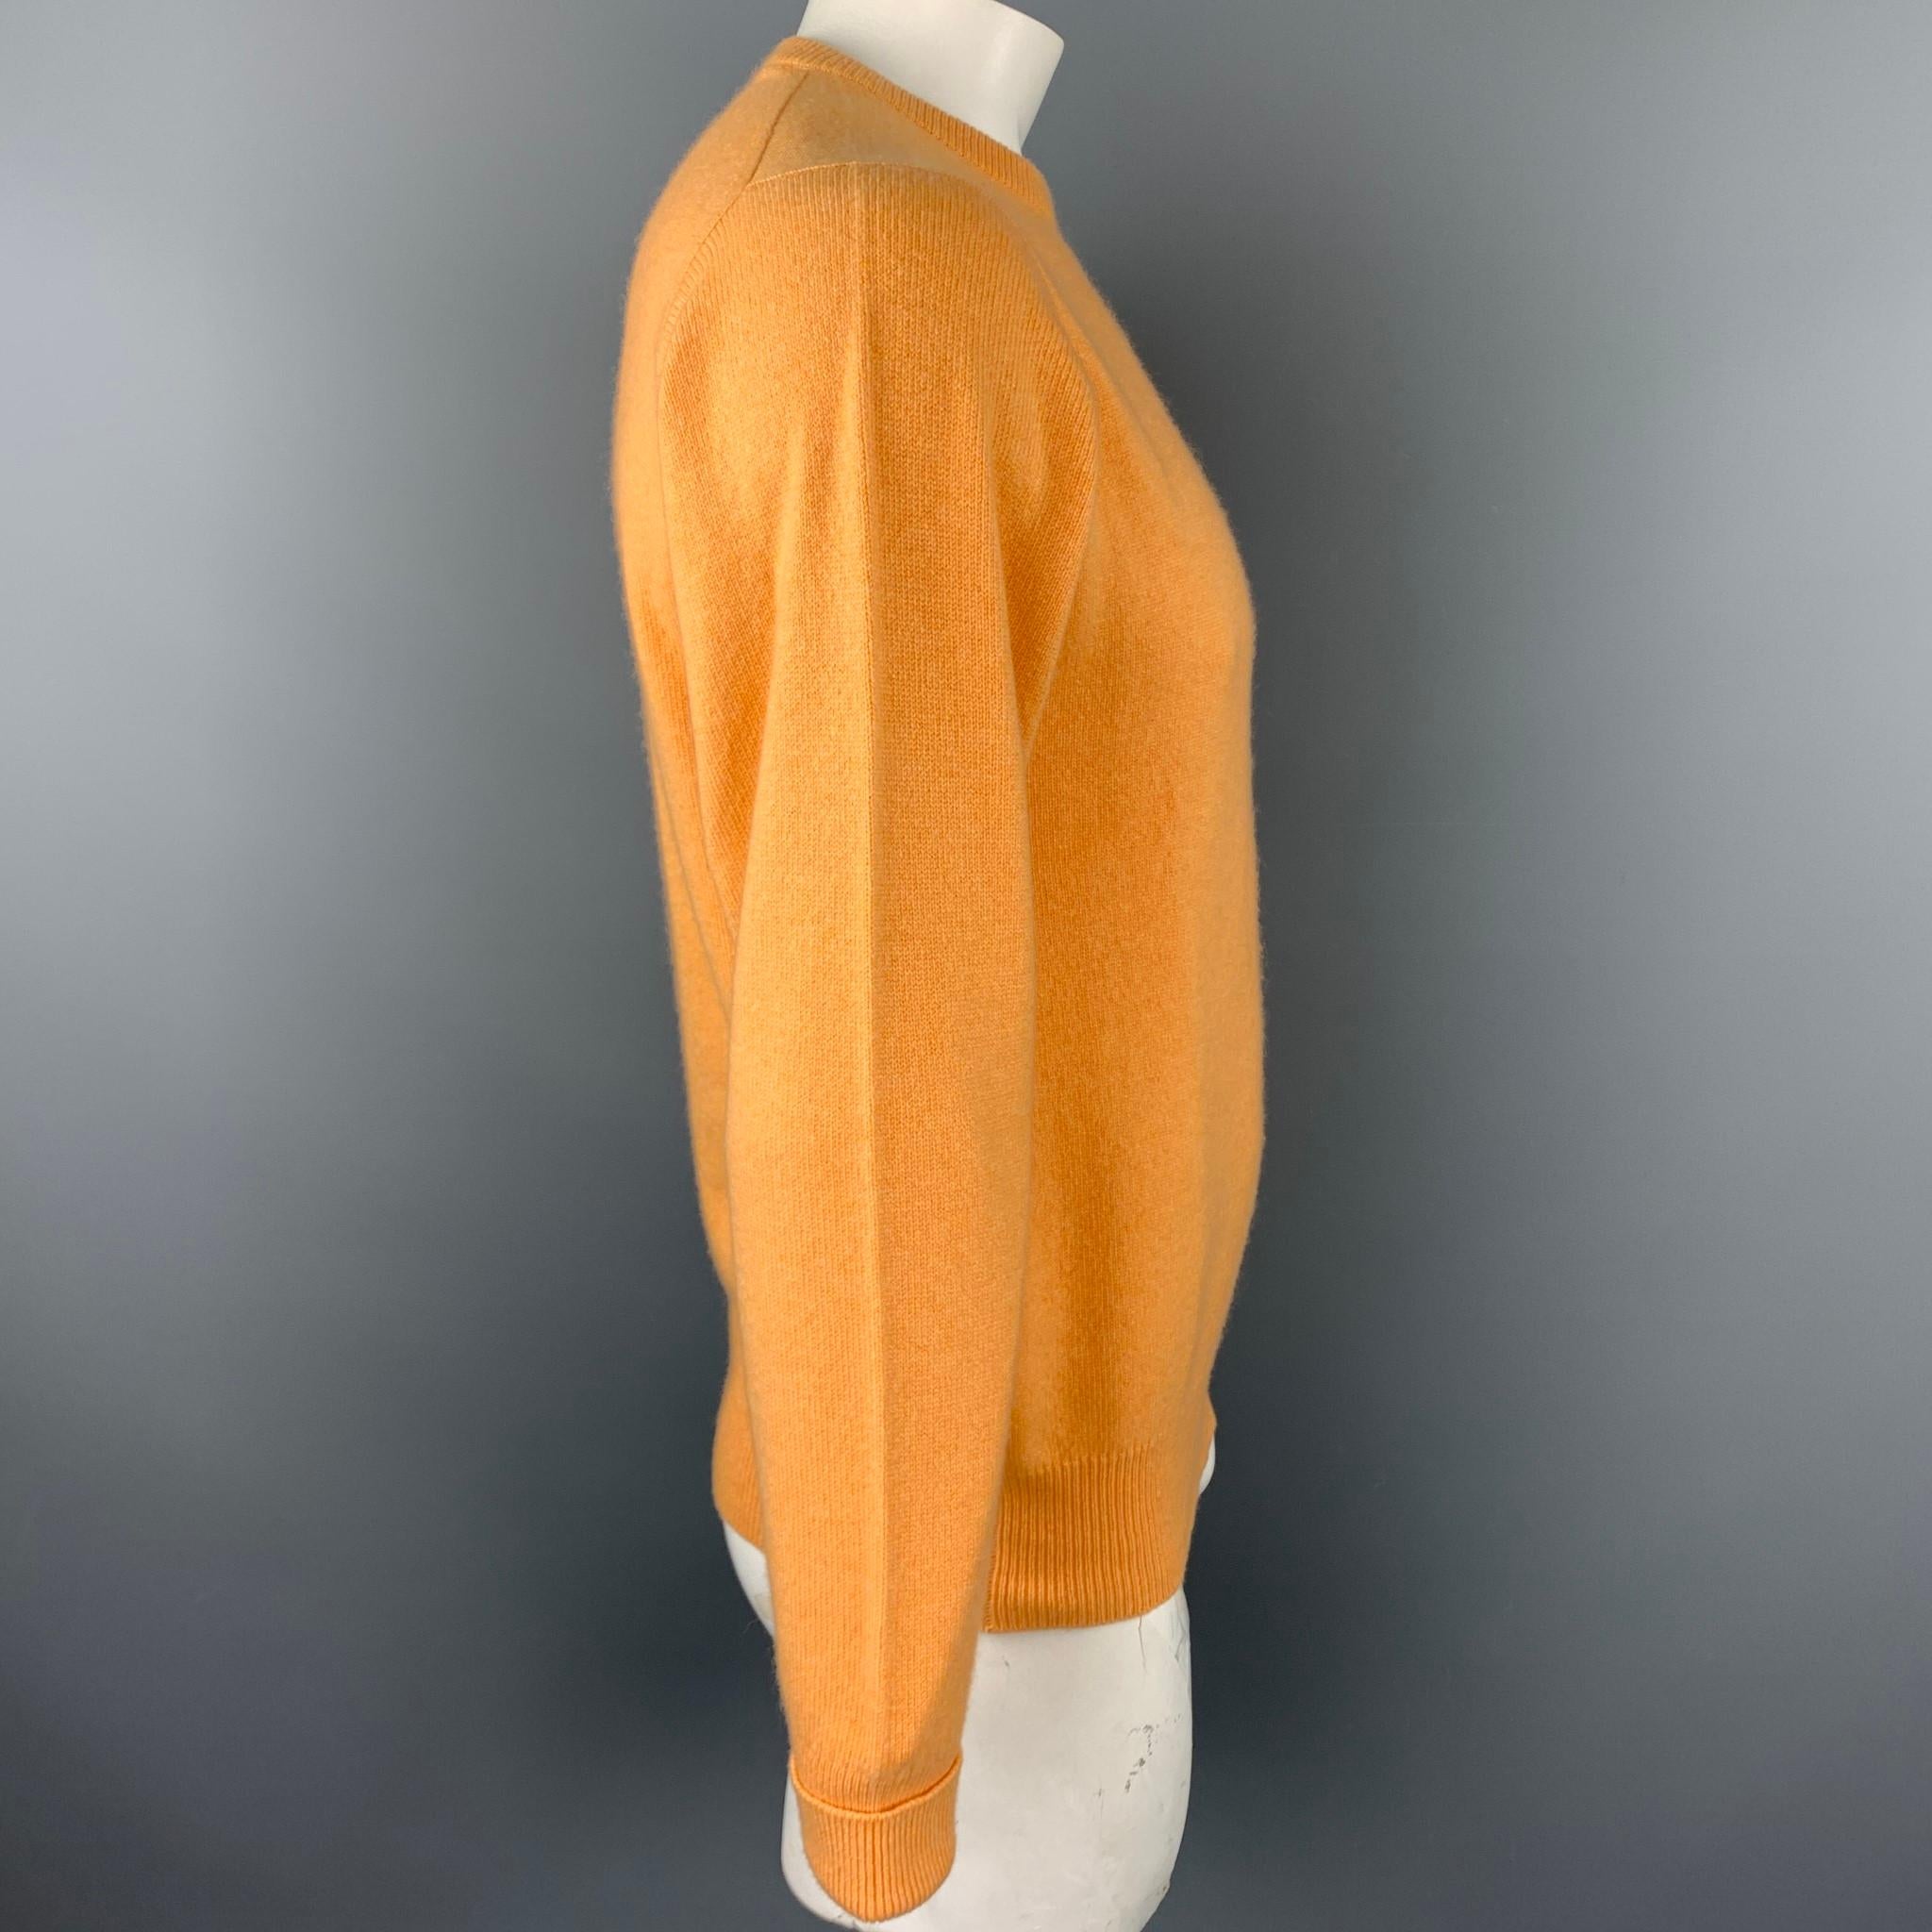 BALLANTYNE sweater comes in a peach cashmere featuring a ribbed crew-neck.

Very Good Pre-Owned Condition.
Marked: 44

Measurements:

Shoulder: 17 in. 
Chest: 44 in. 
Sleeve: 29 in. 
Length: 26 in. 
